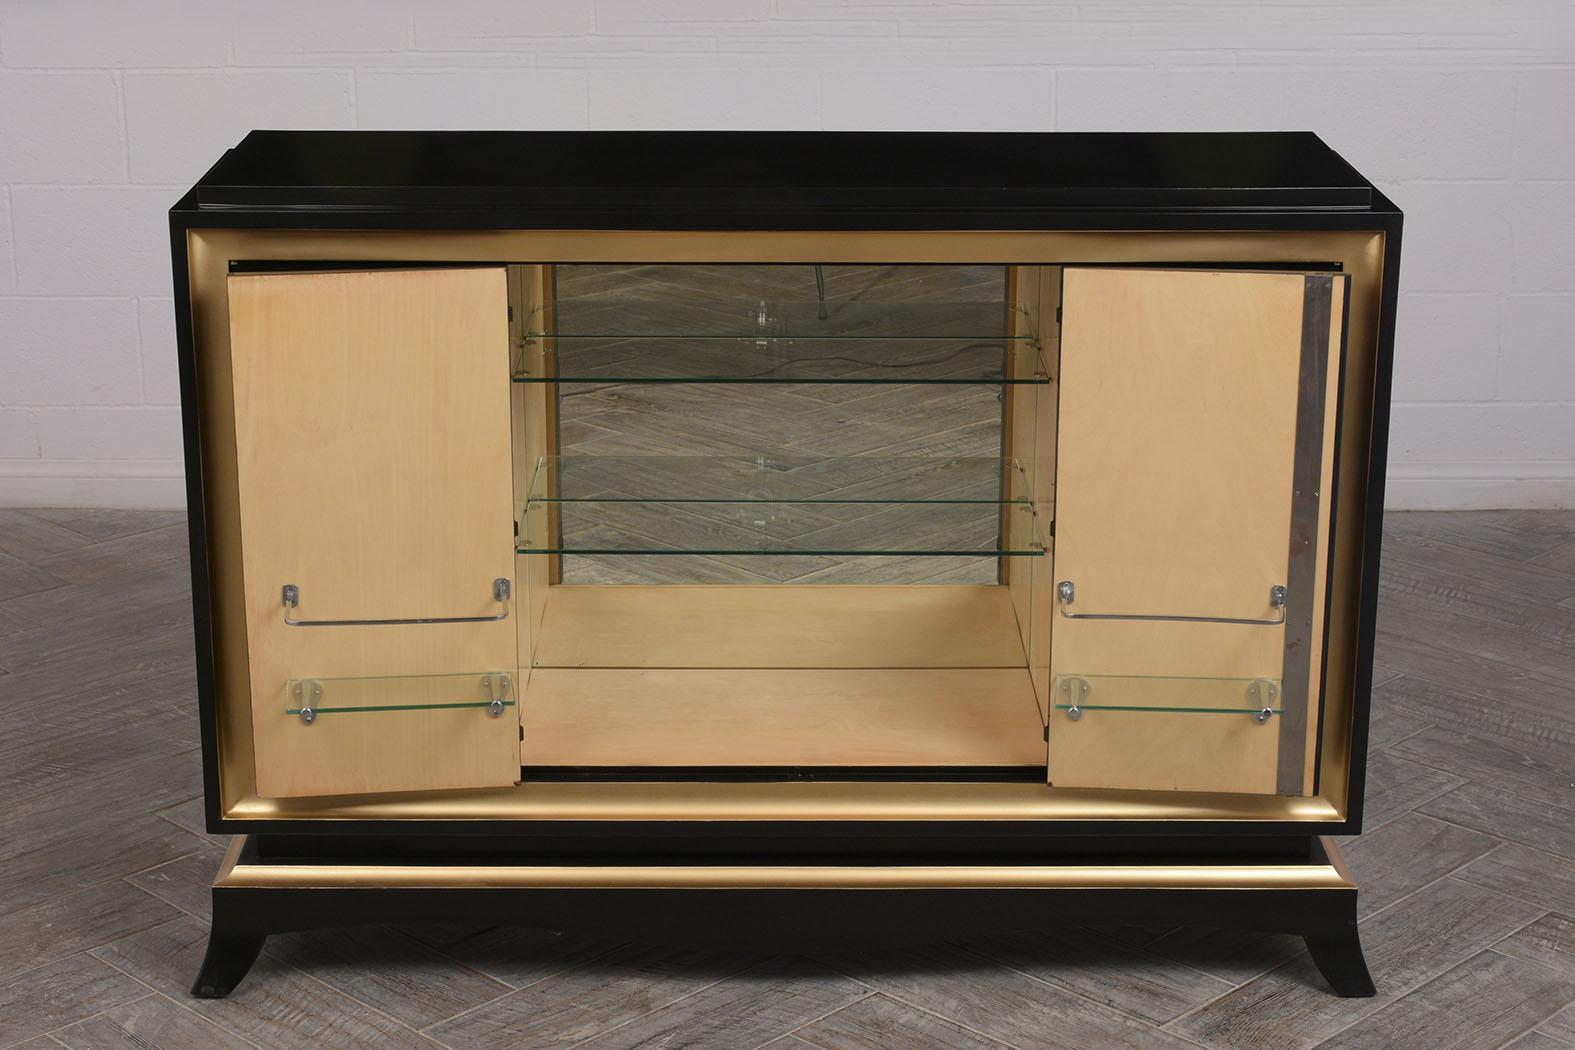 This beautiful 1930s French dry bar is made from solid wood with ebonized and gold gilt accent finish. There are two cabinet doors that fold to open with three sections inside. The two outer sections have two adjustable wood shelves and the